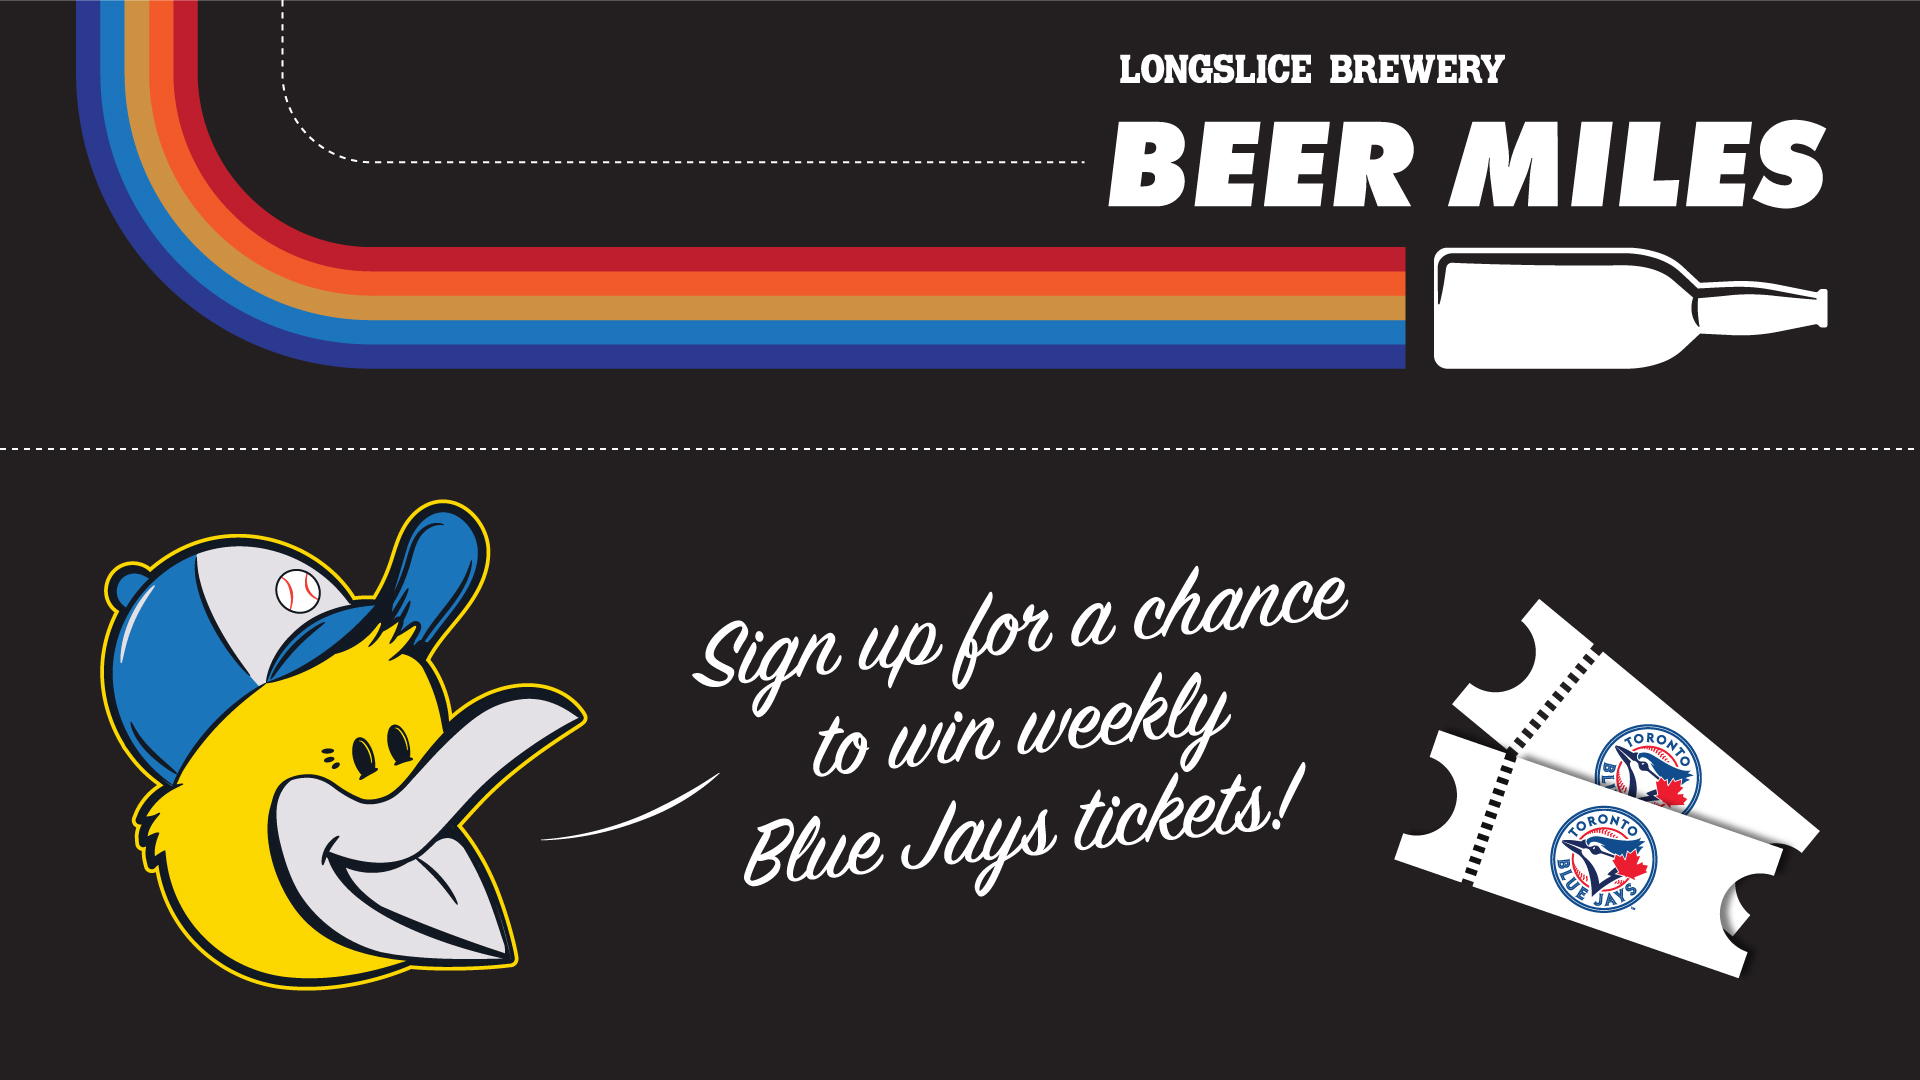 Blue Jays ticket giveaway with Beer Miles